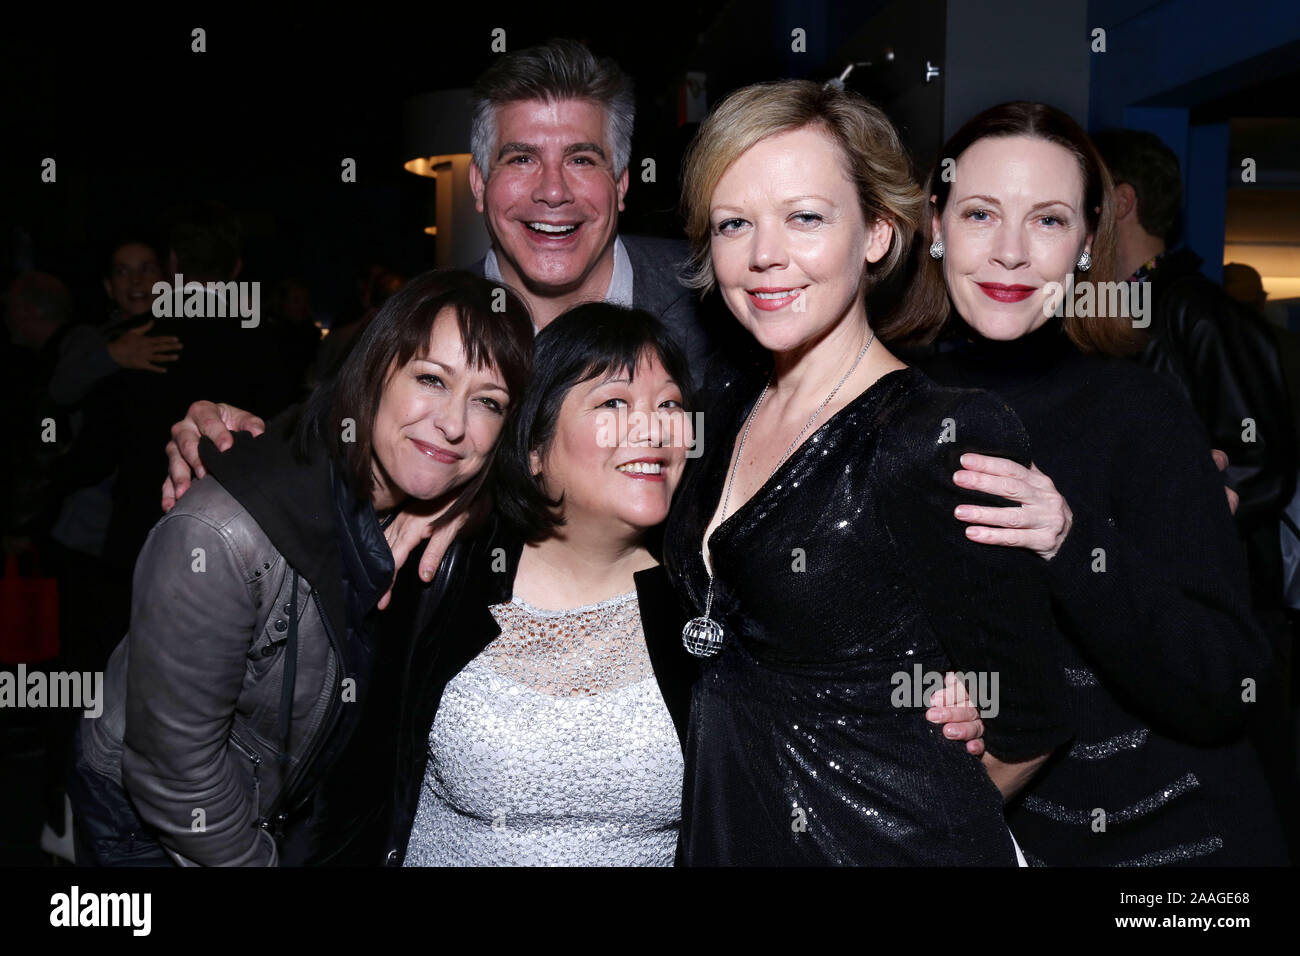 Red Bull Theater Benefit Concert of Return To The Forbidden Planet at Symphony Space - Arrivals. Featuring: Page Davis, Bryan Batt, Ann Harada, Emily Bergl, Veanne Cox Where: New York, New York, United States When: 22 Oct 2019 Credit: Joseph Marzullo/WENN.com Stock Photo